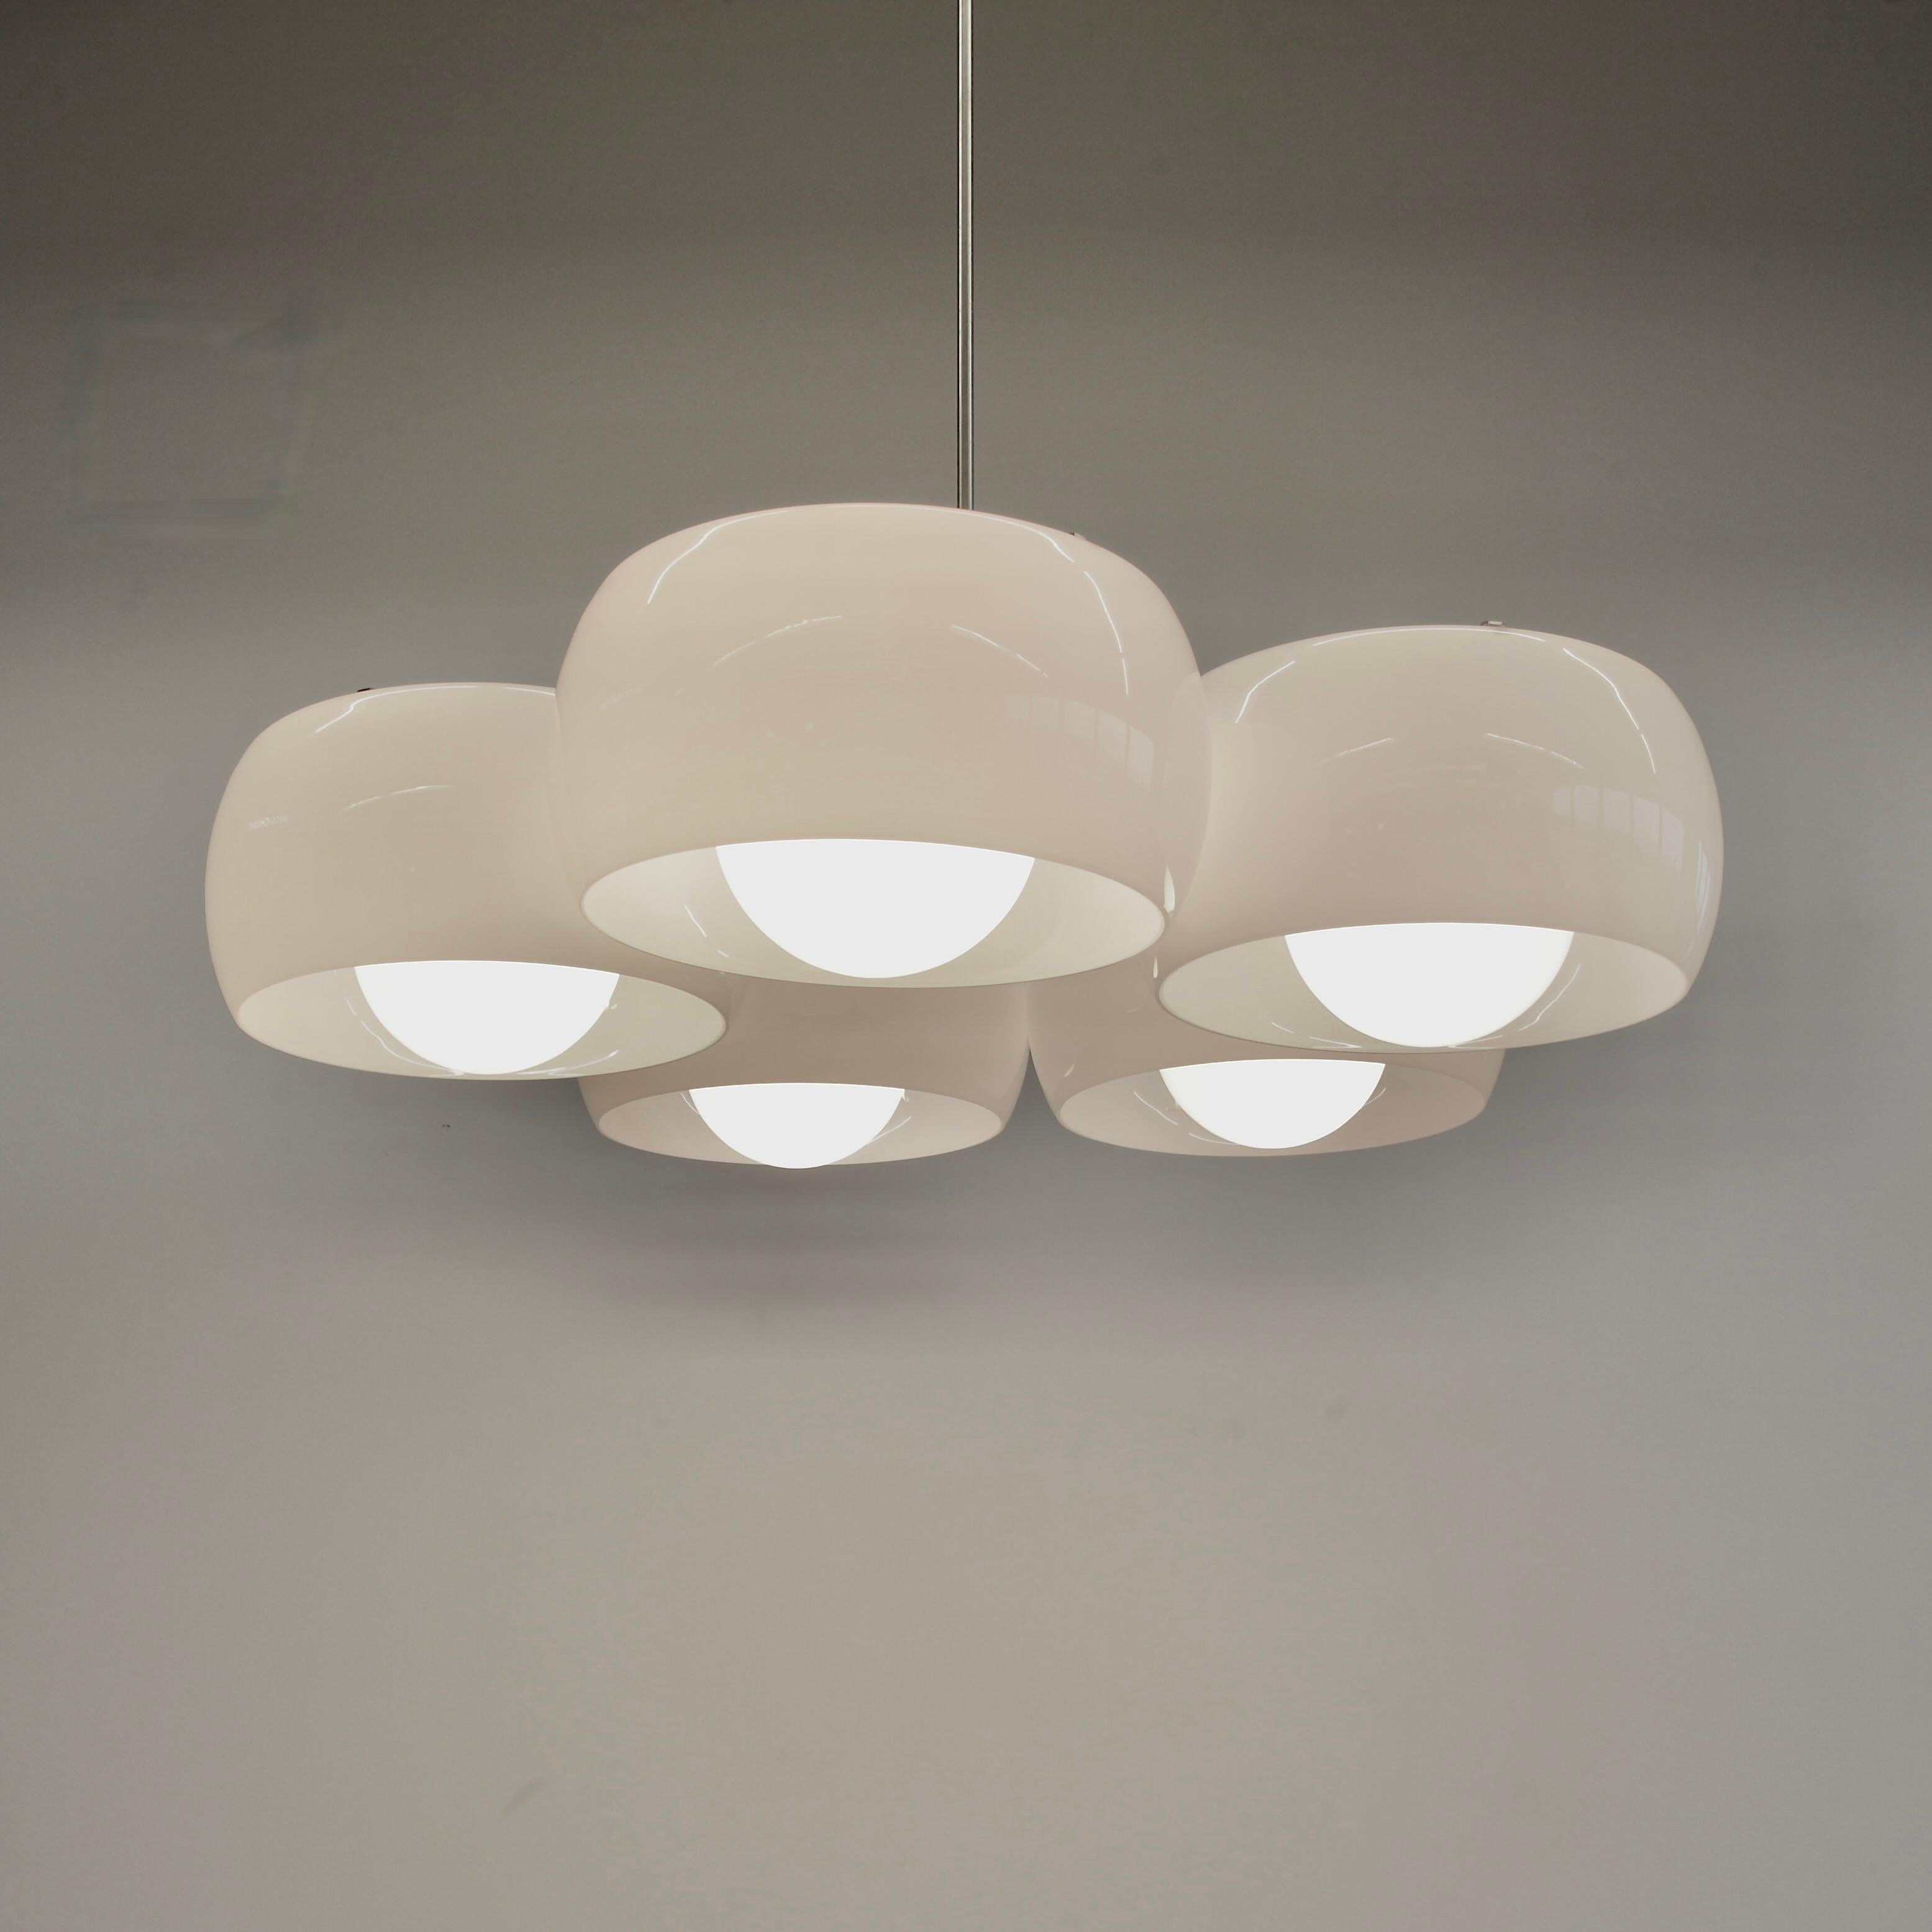 Mid-20th Century Large Ceiling Lamp PENTACLINIO, designed by Vico MAGISTRETTI for Artemide, 1961